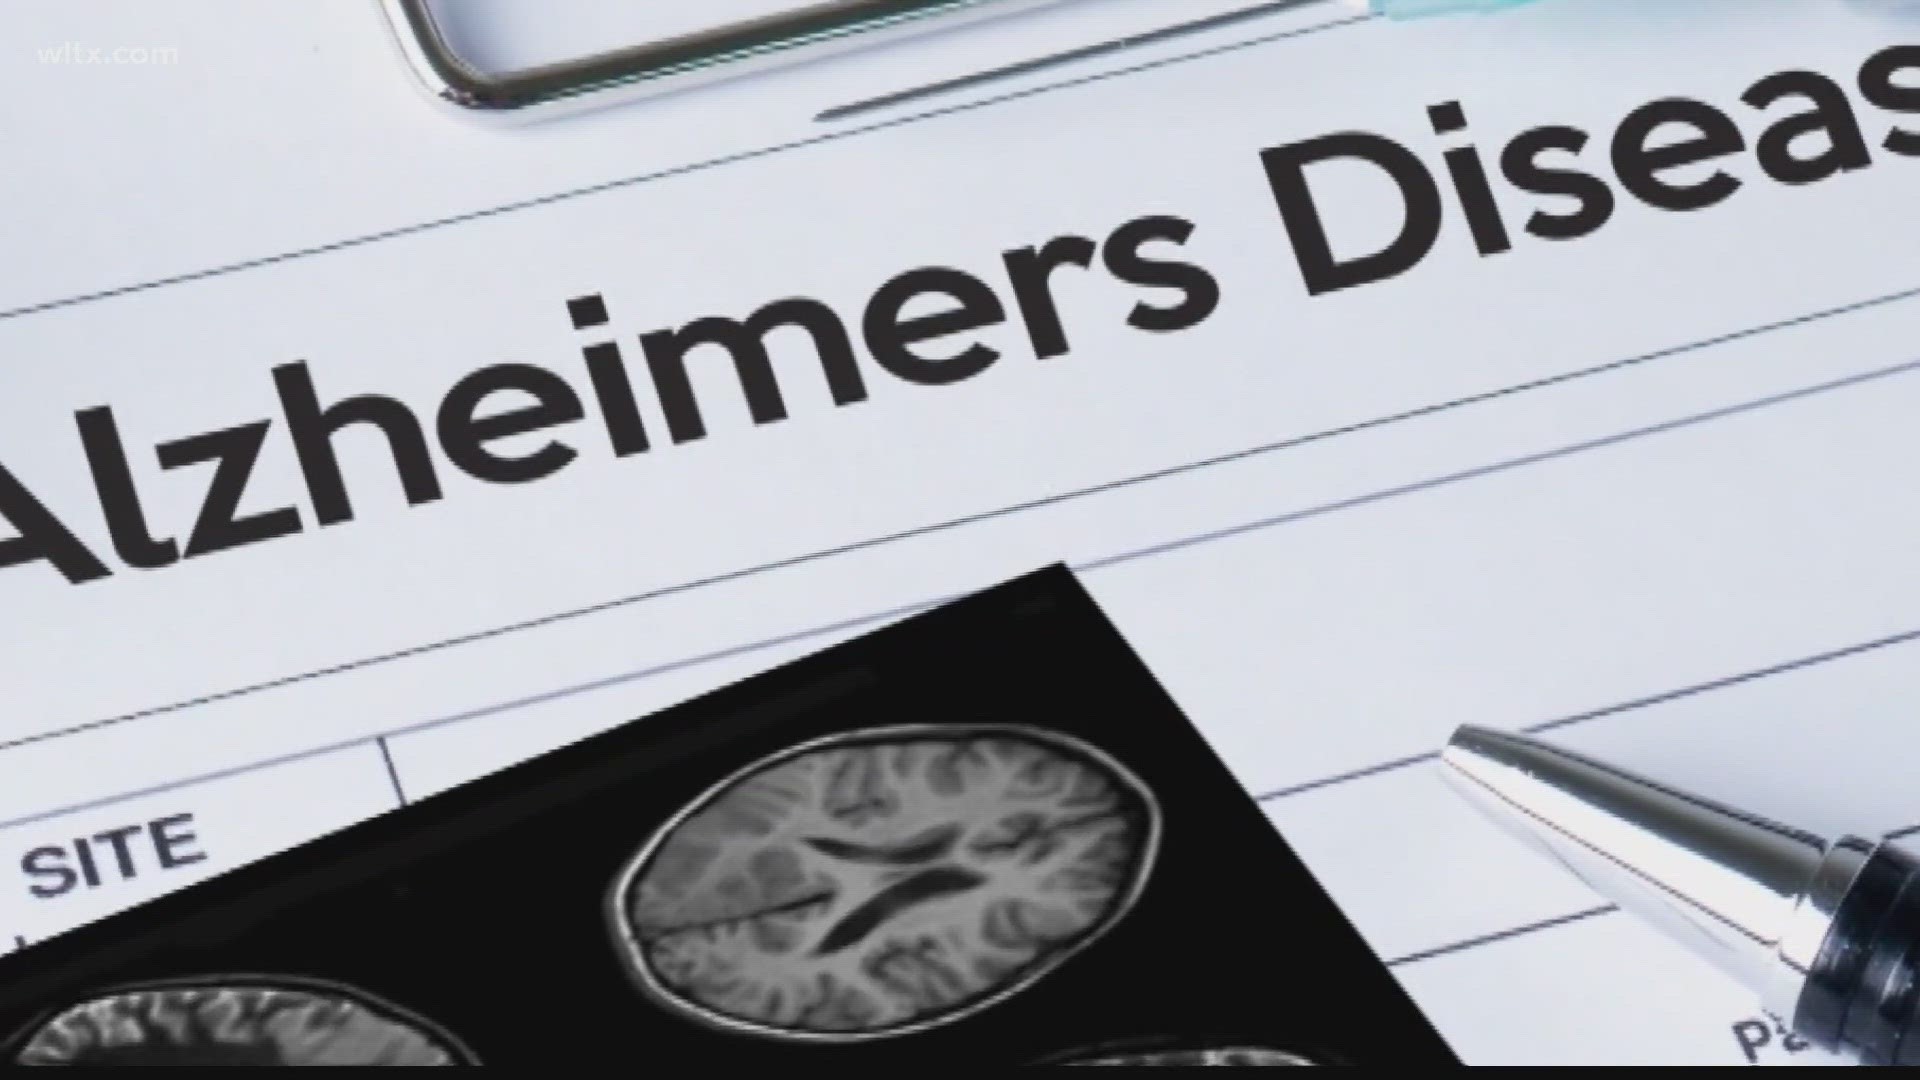 South Carolina's three research universities are partnering to create the states first Alzheimer's disease research center.